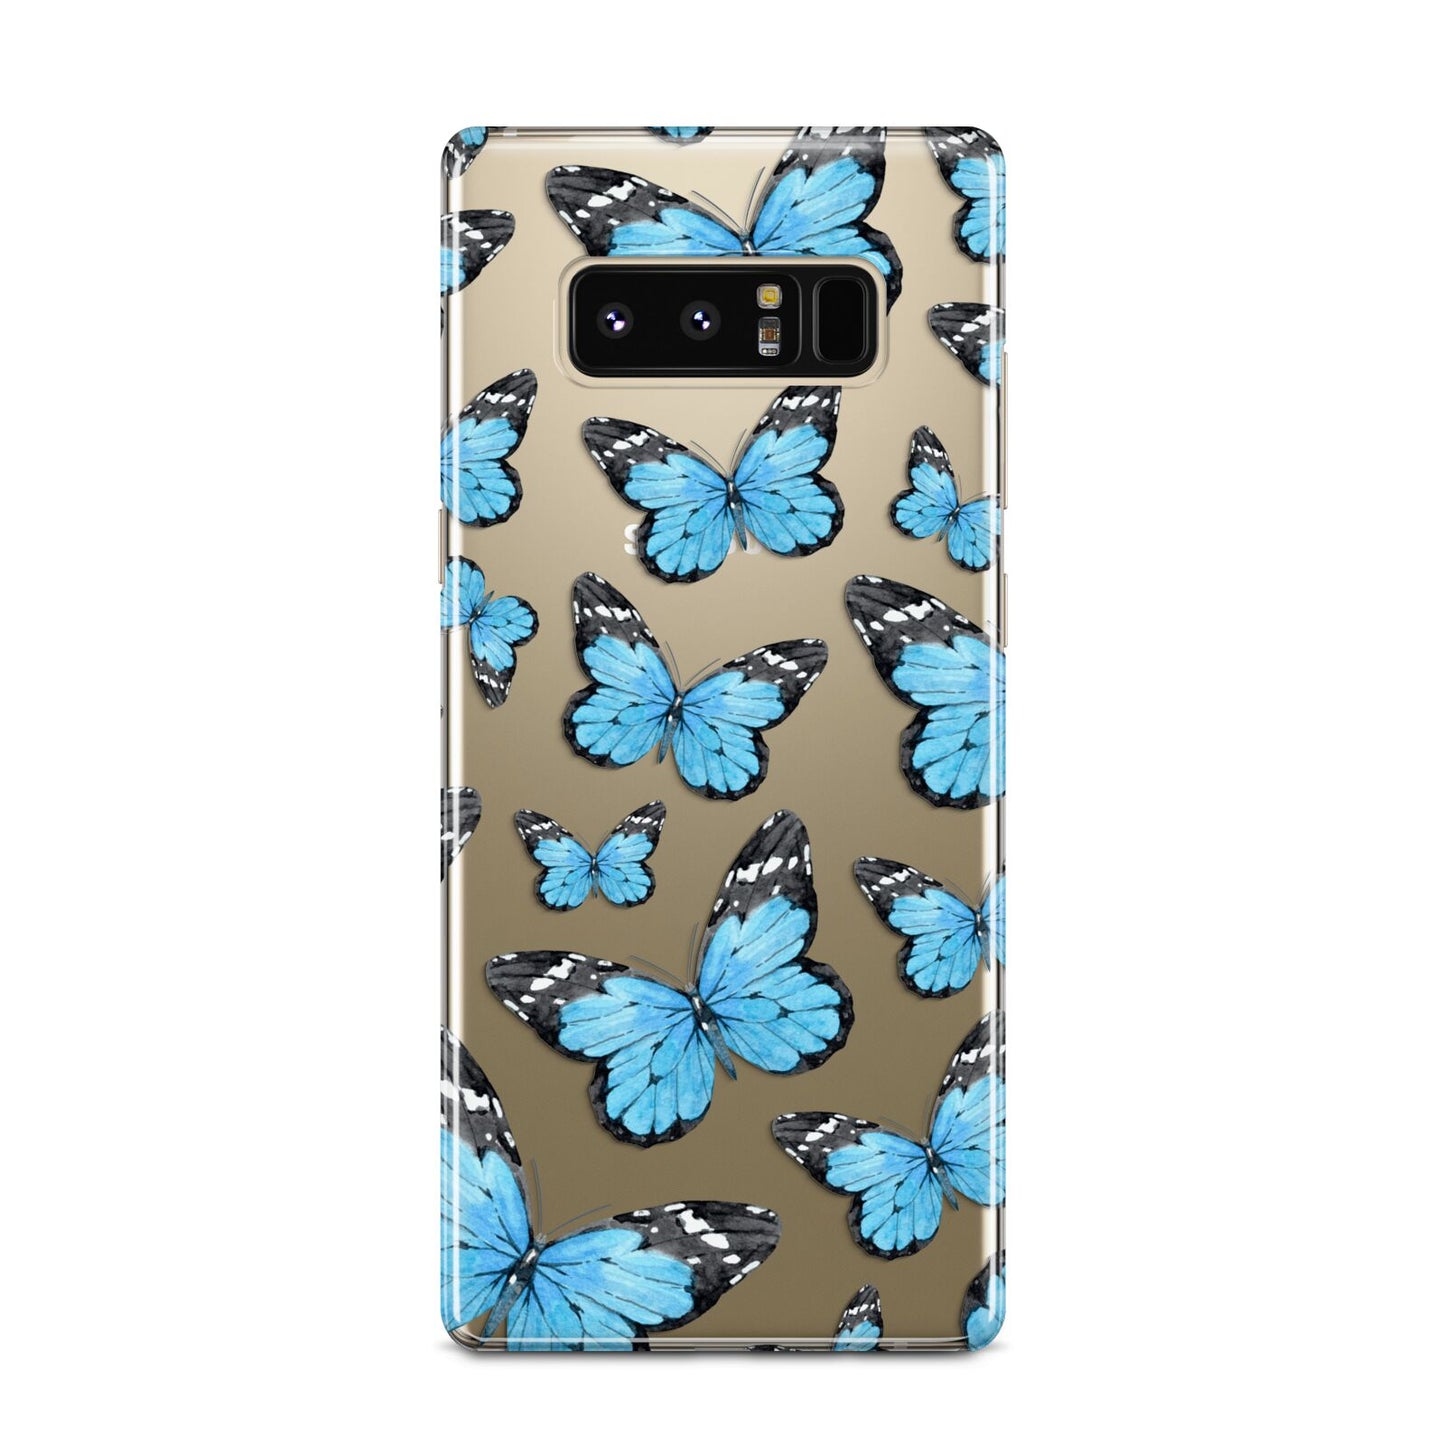 Blue Butterfly Samsung Galaxy Note 8 Case